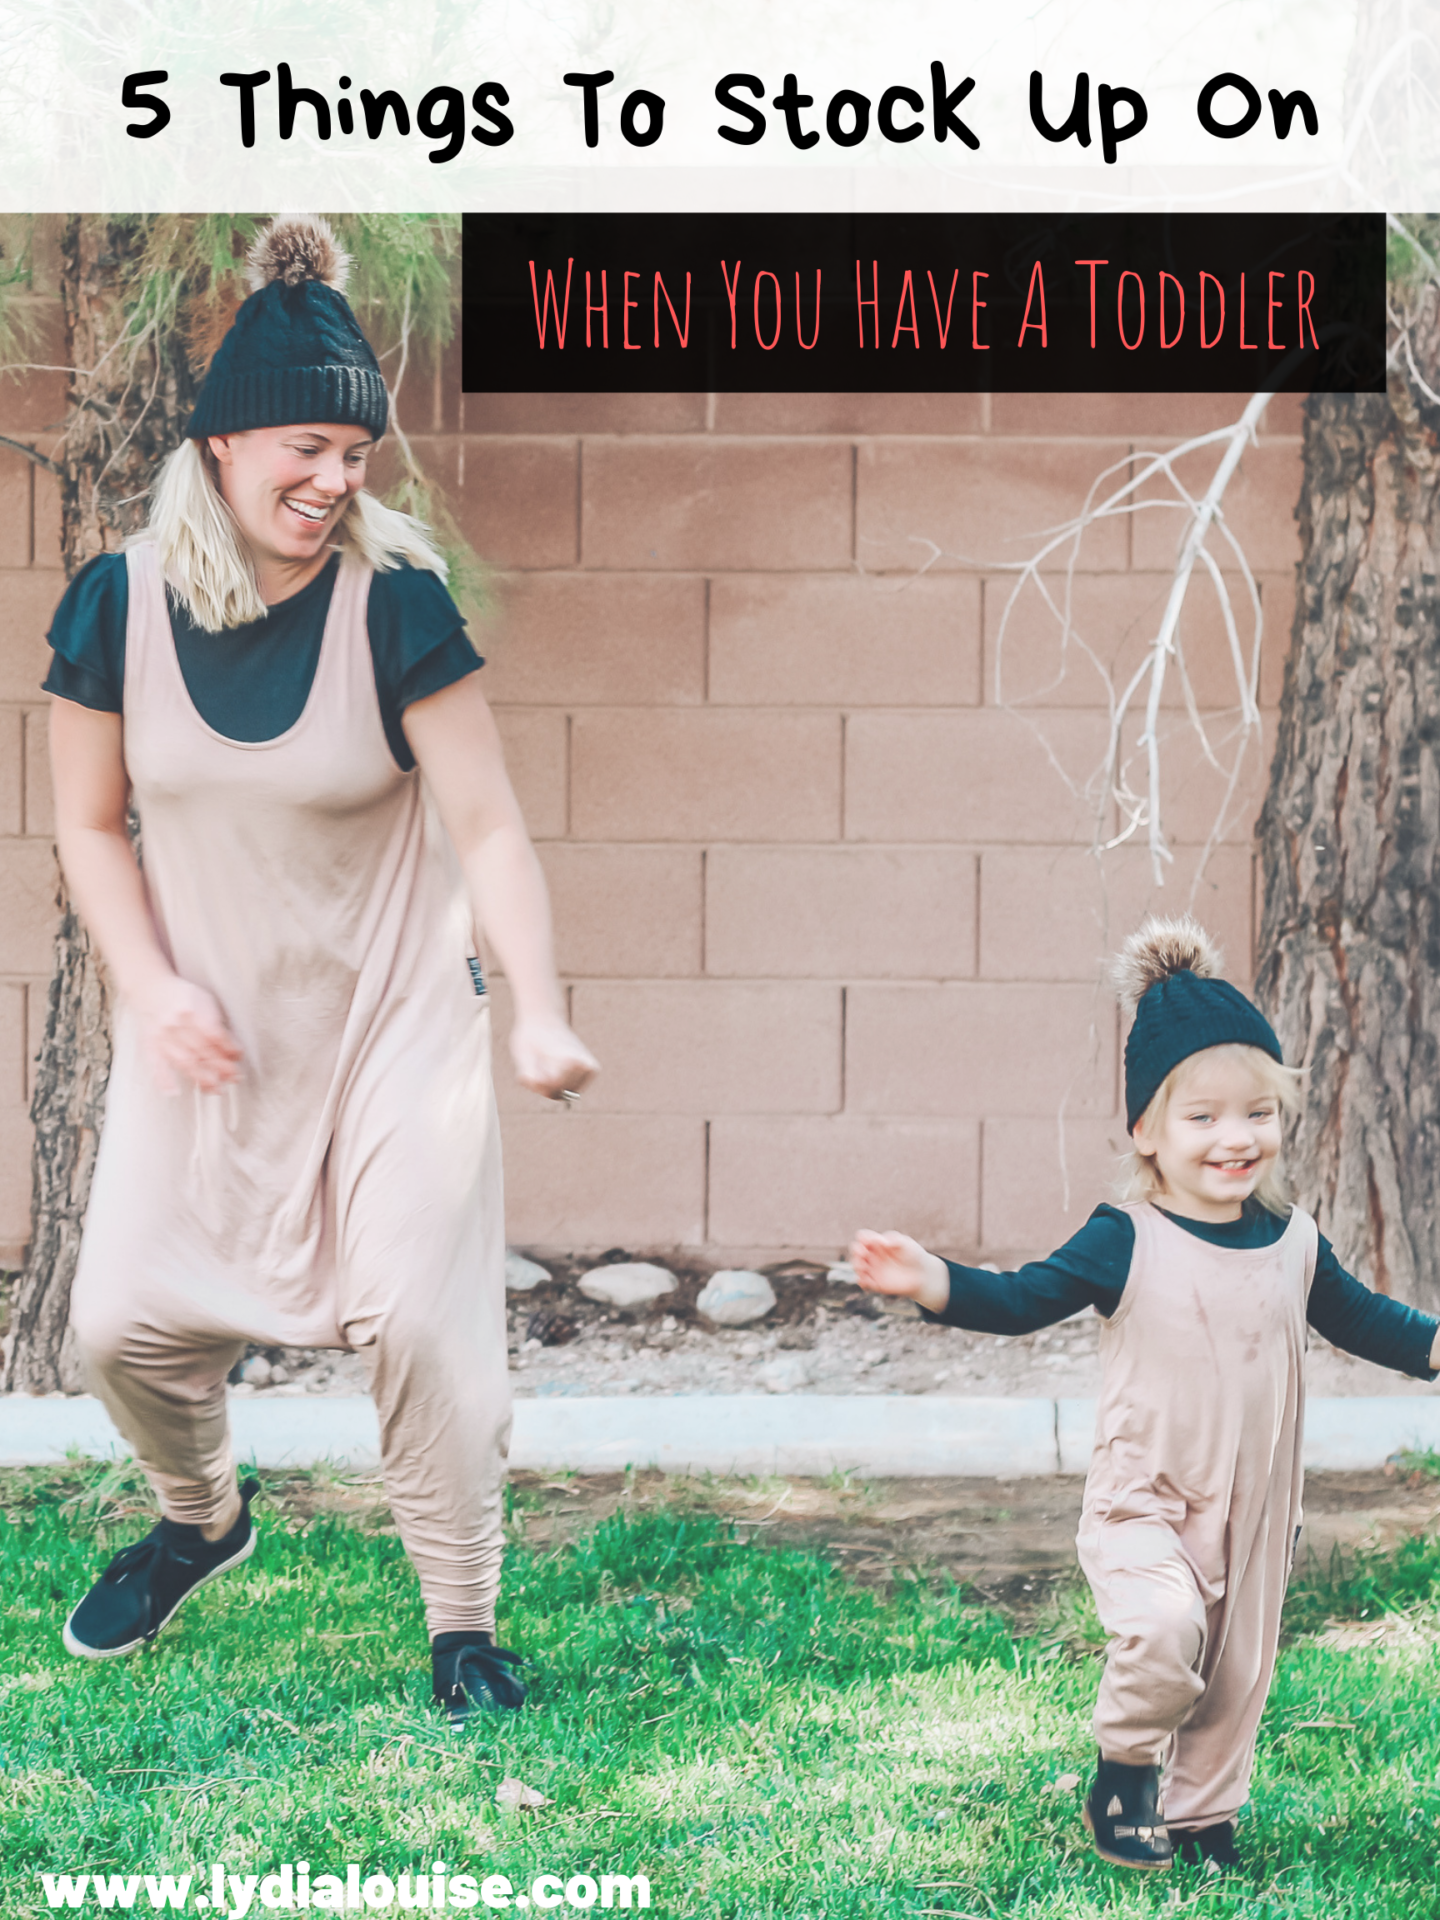 5 Things You Need To Stock Up On When You Have a Toddler